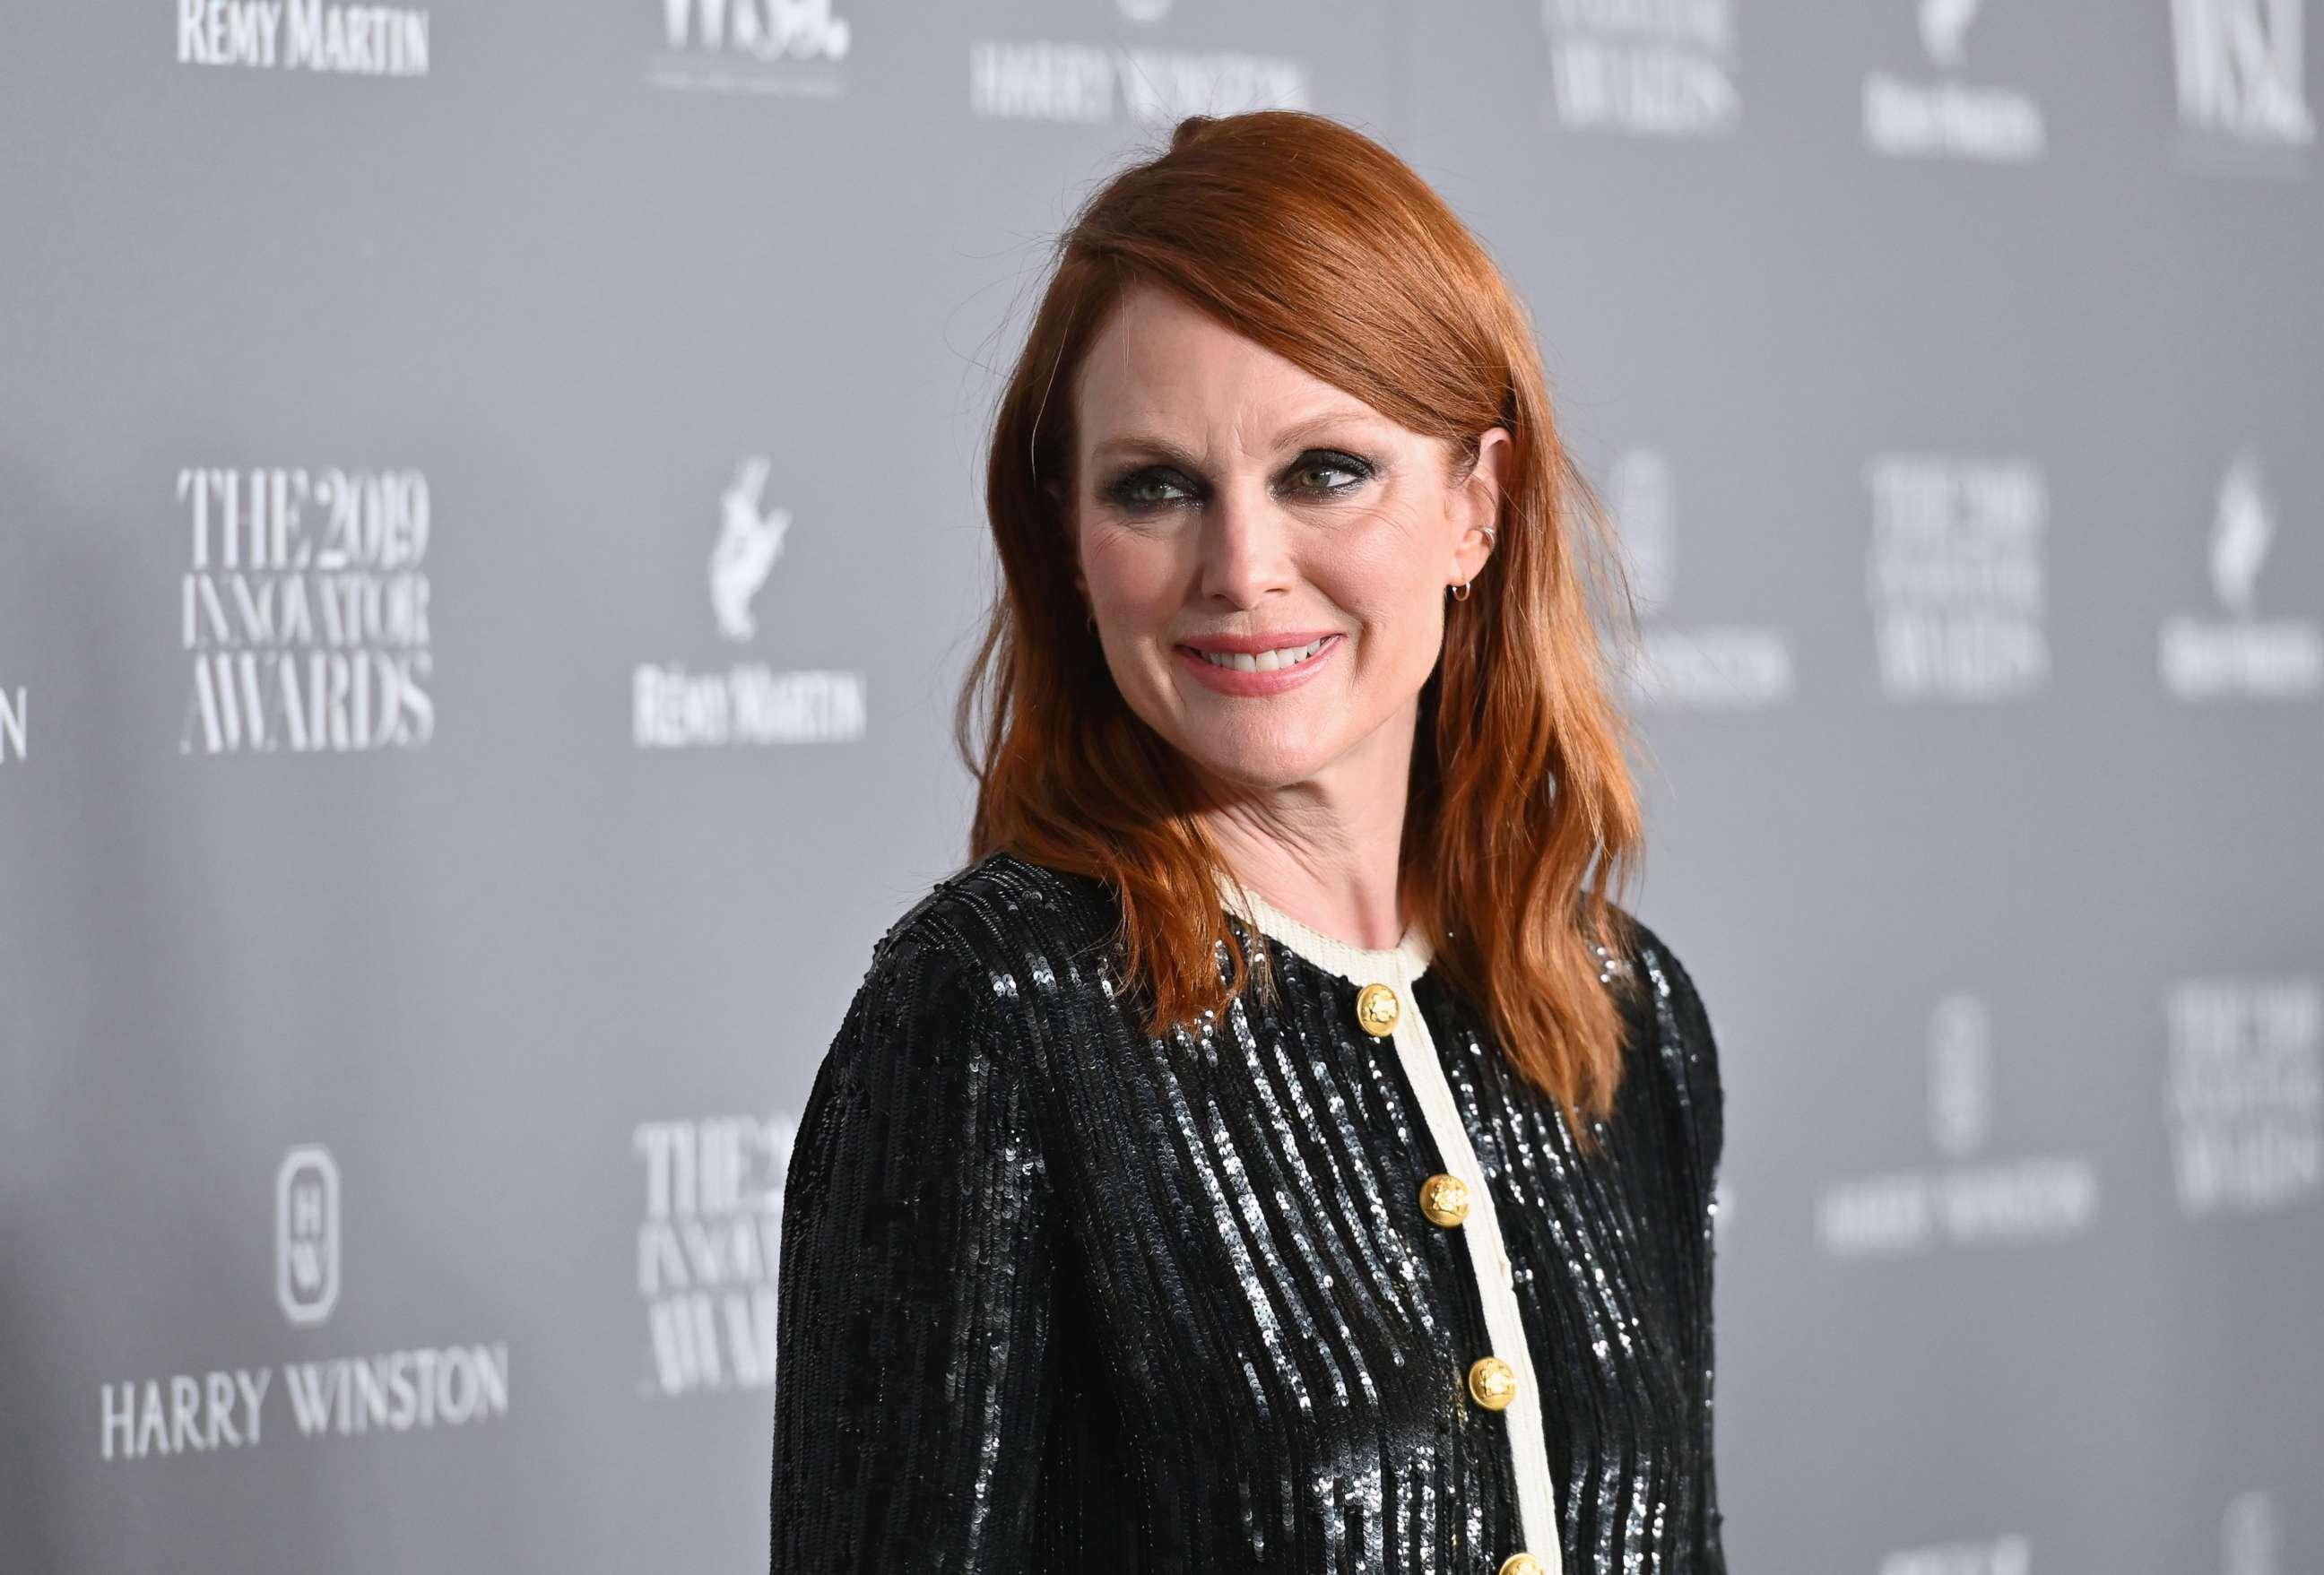 PHOTO: Actress Julianne Moore attends an event at MOMA on Nov. 6, 2019, in New York.